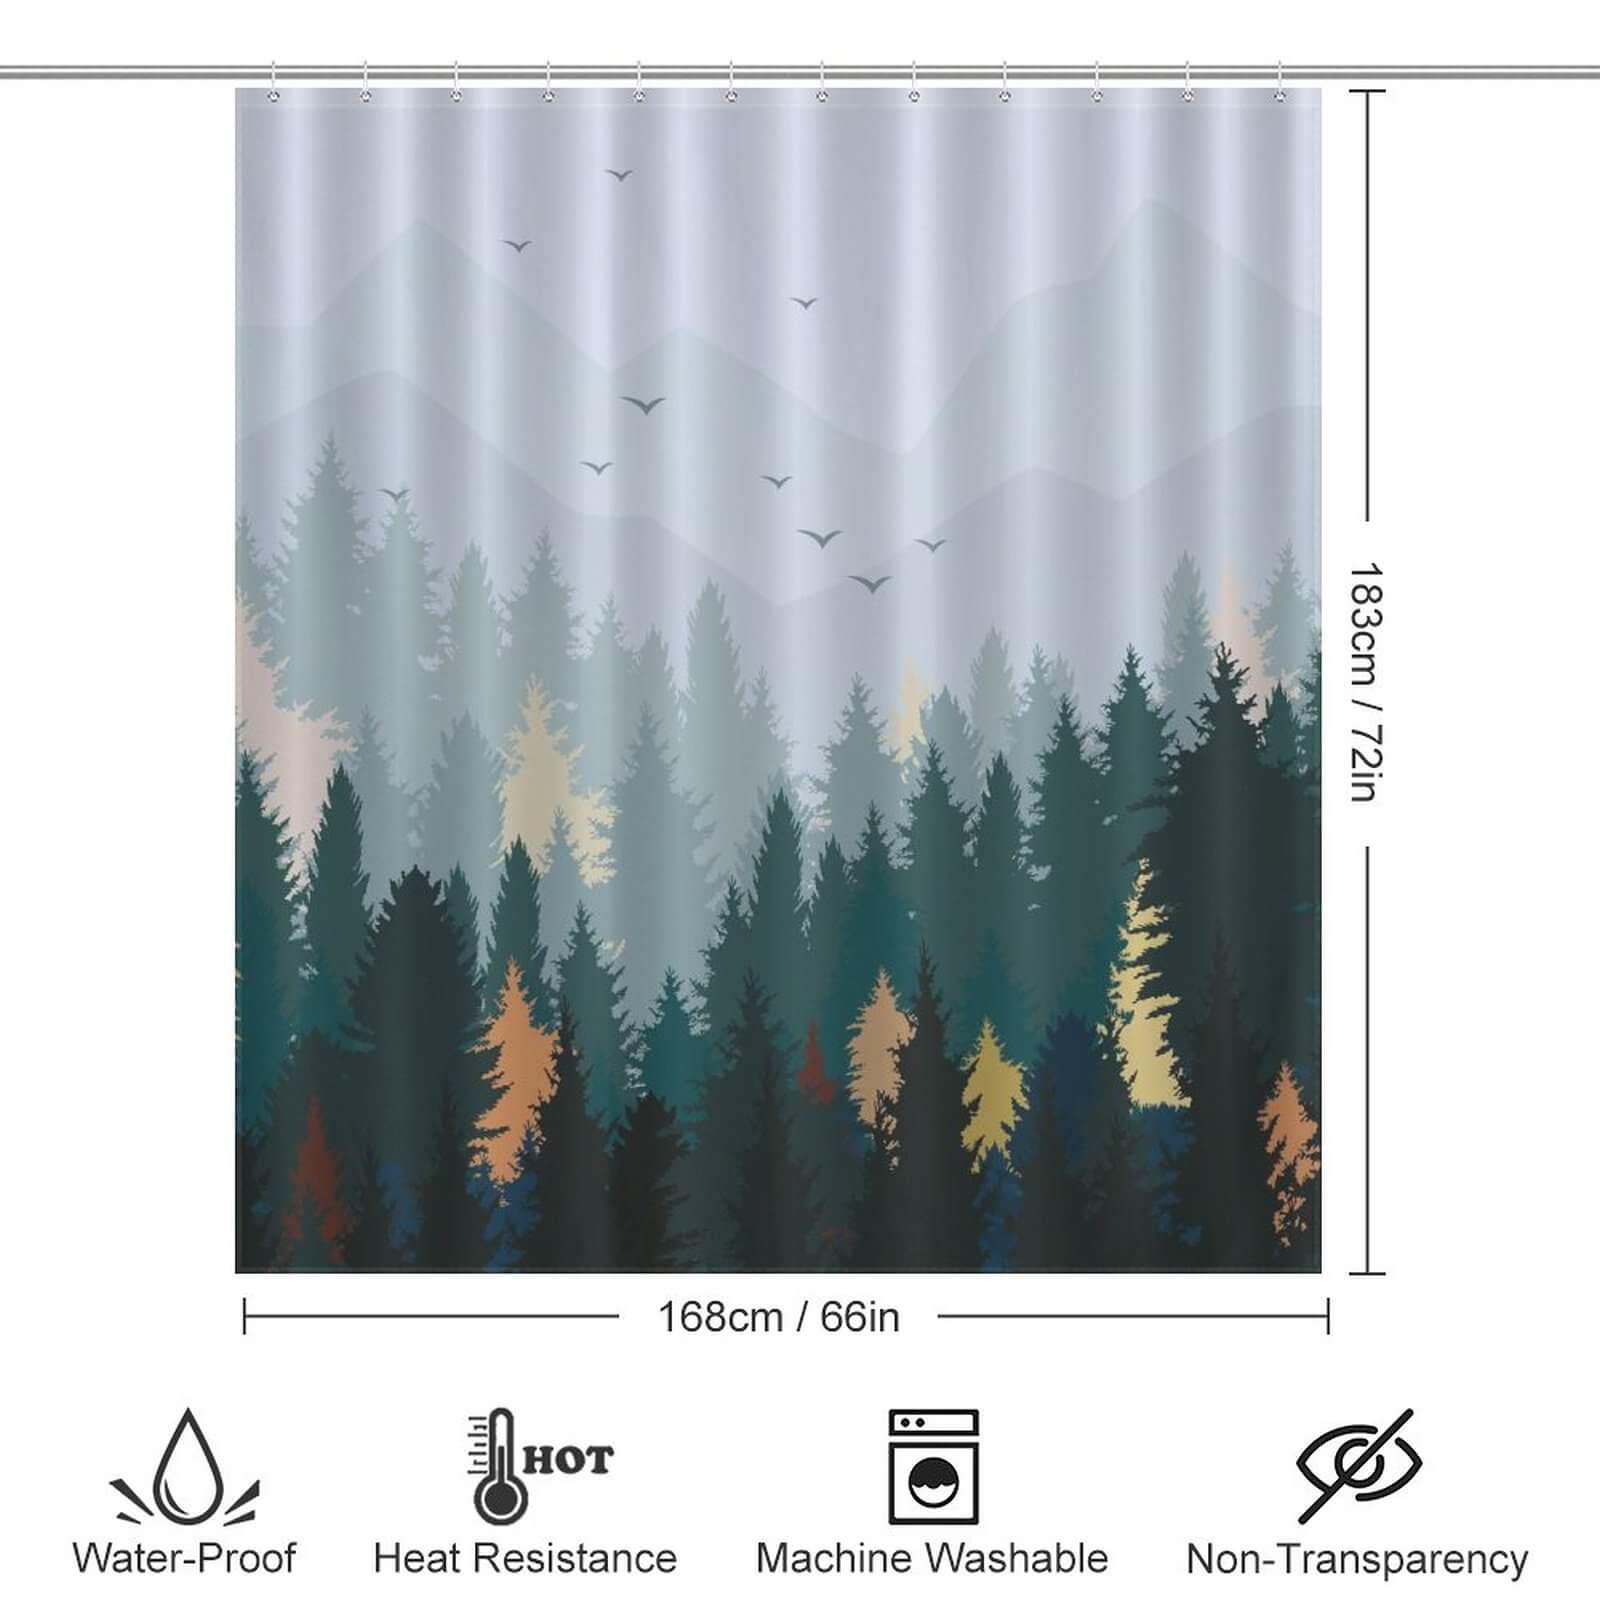 A Pine Forest Shower Curtain from Cotton Cat, with trees and birds, ideal for bathroom decor.